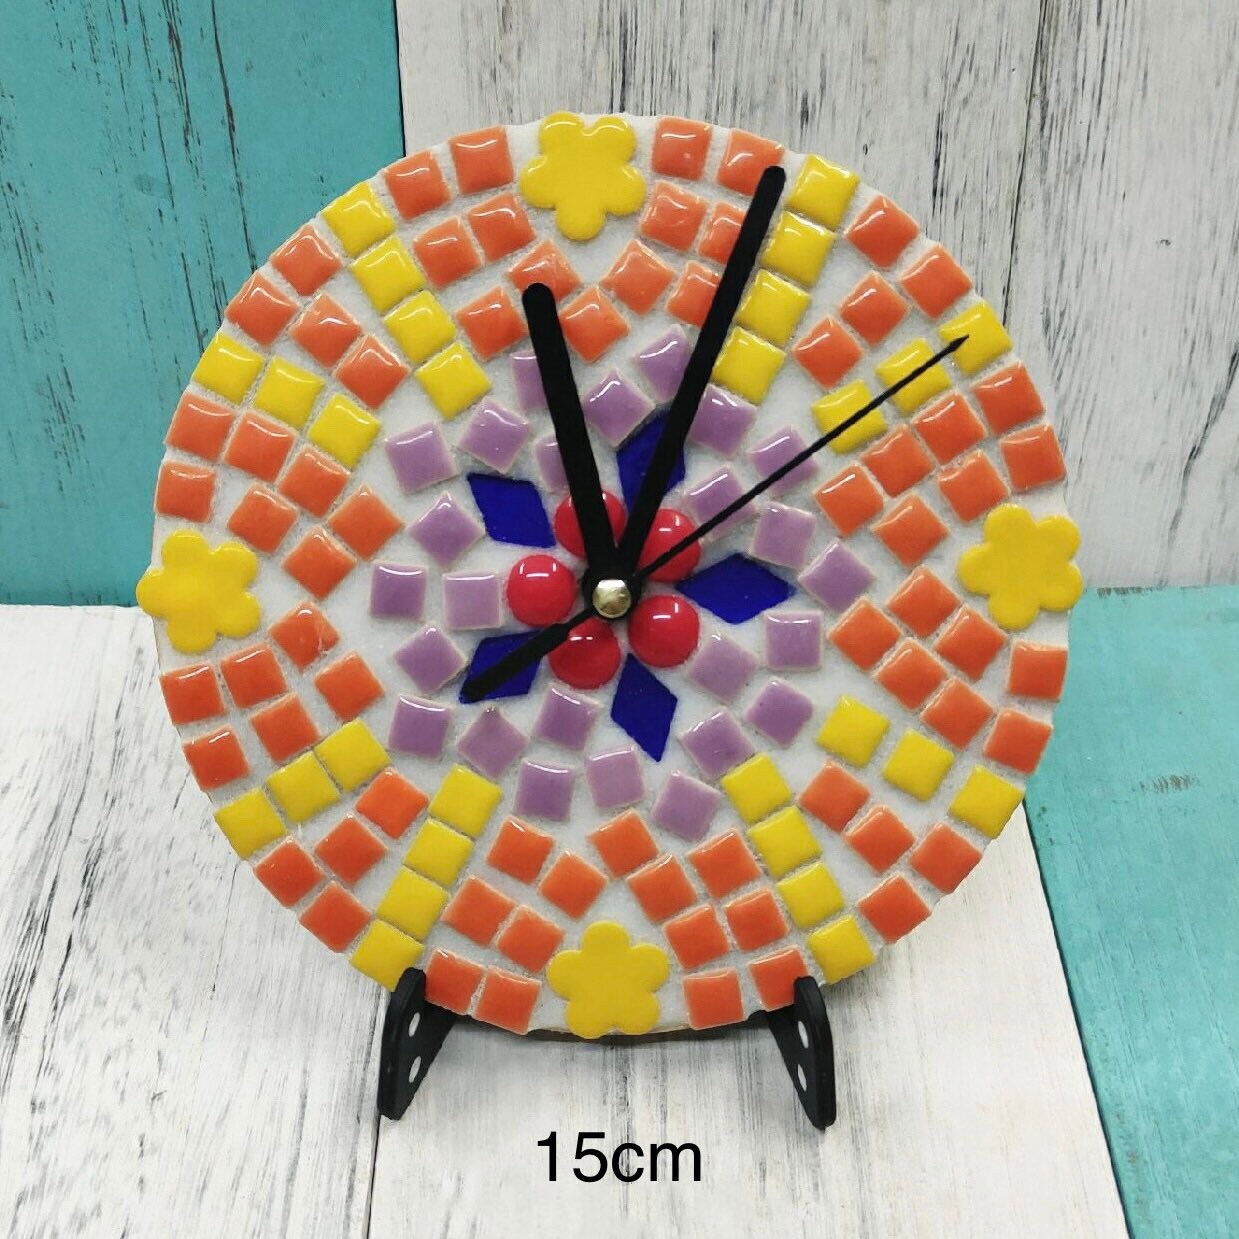  ONE TO FOUR Mosaic Kids Wall Clock for Do It Yourself